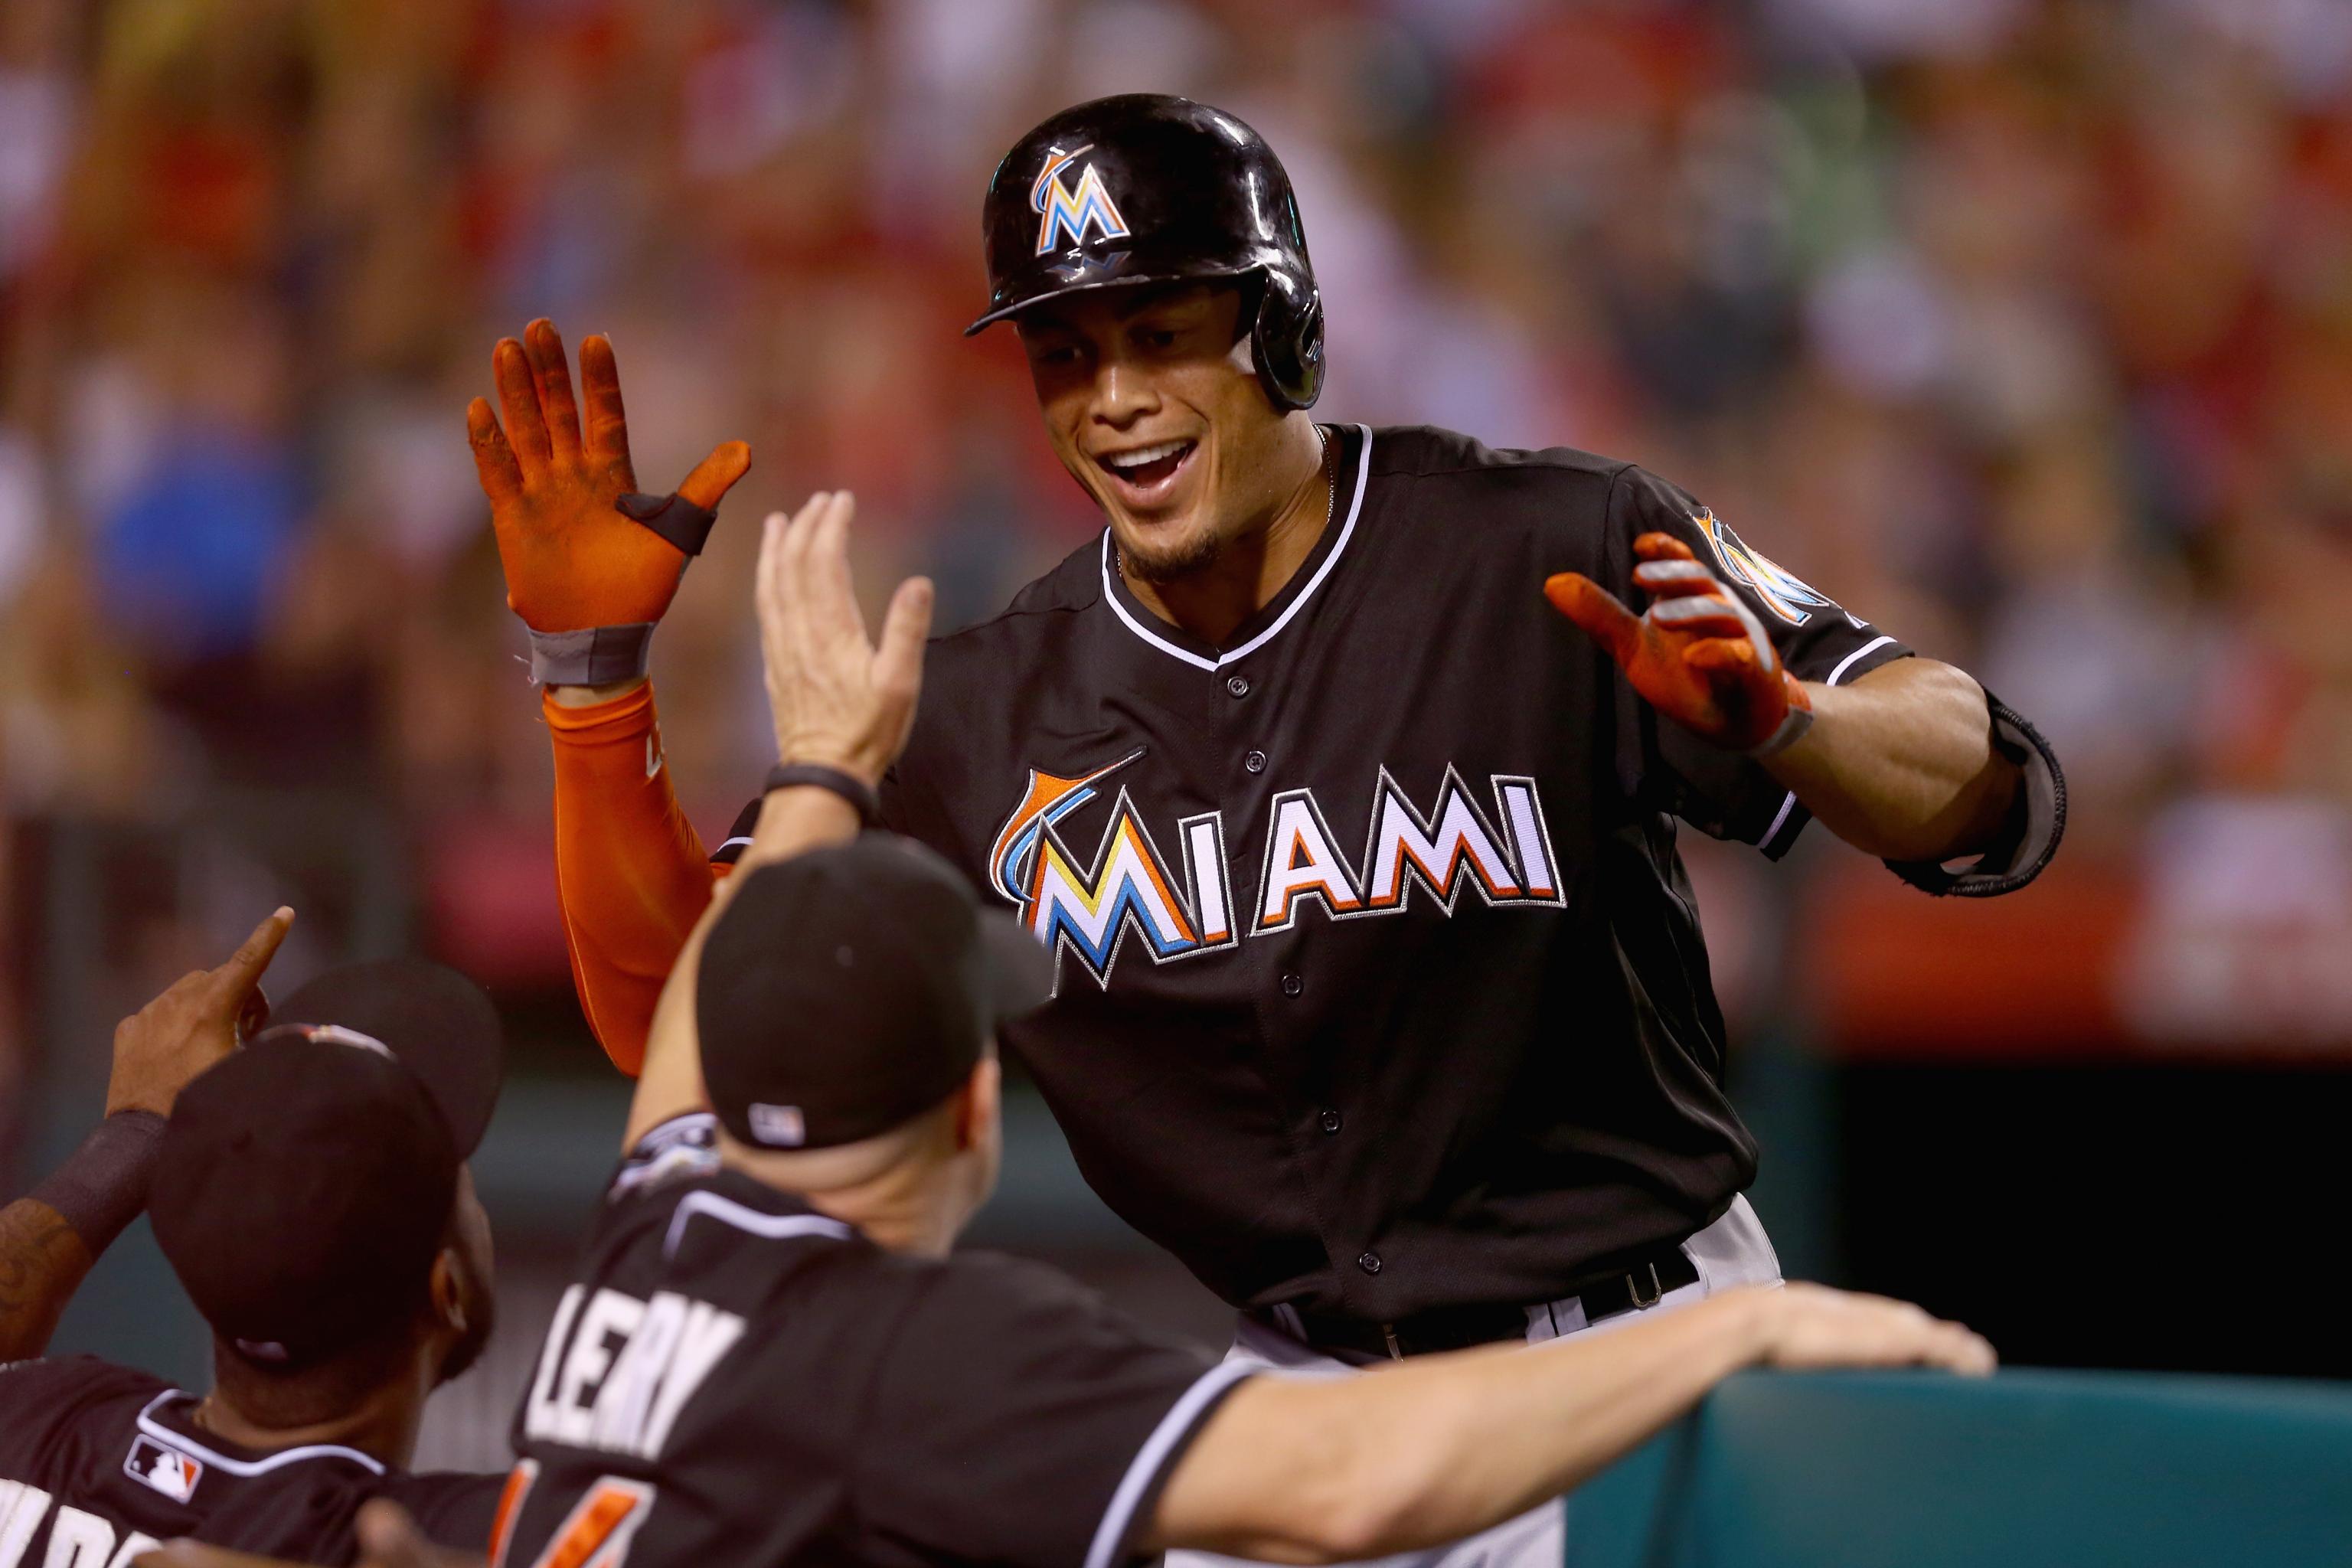 Miami Marlins' Giancarlo Stanton Becomes 12th Player with 150